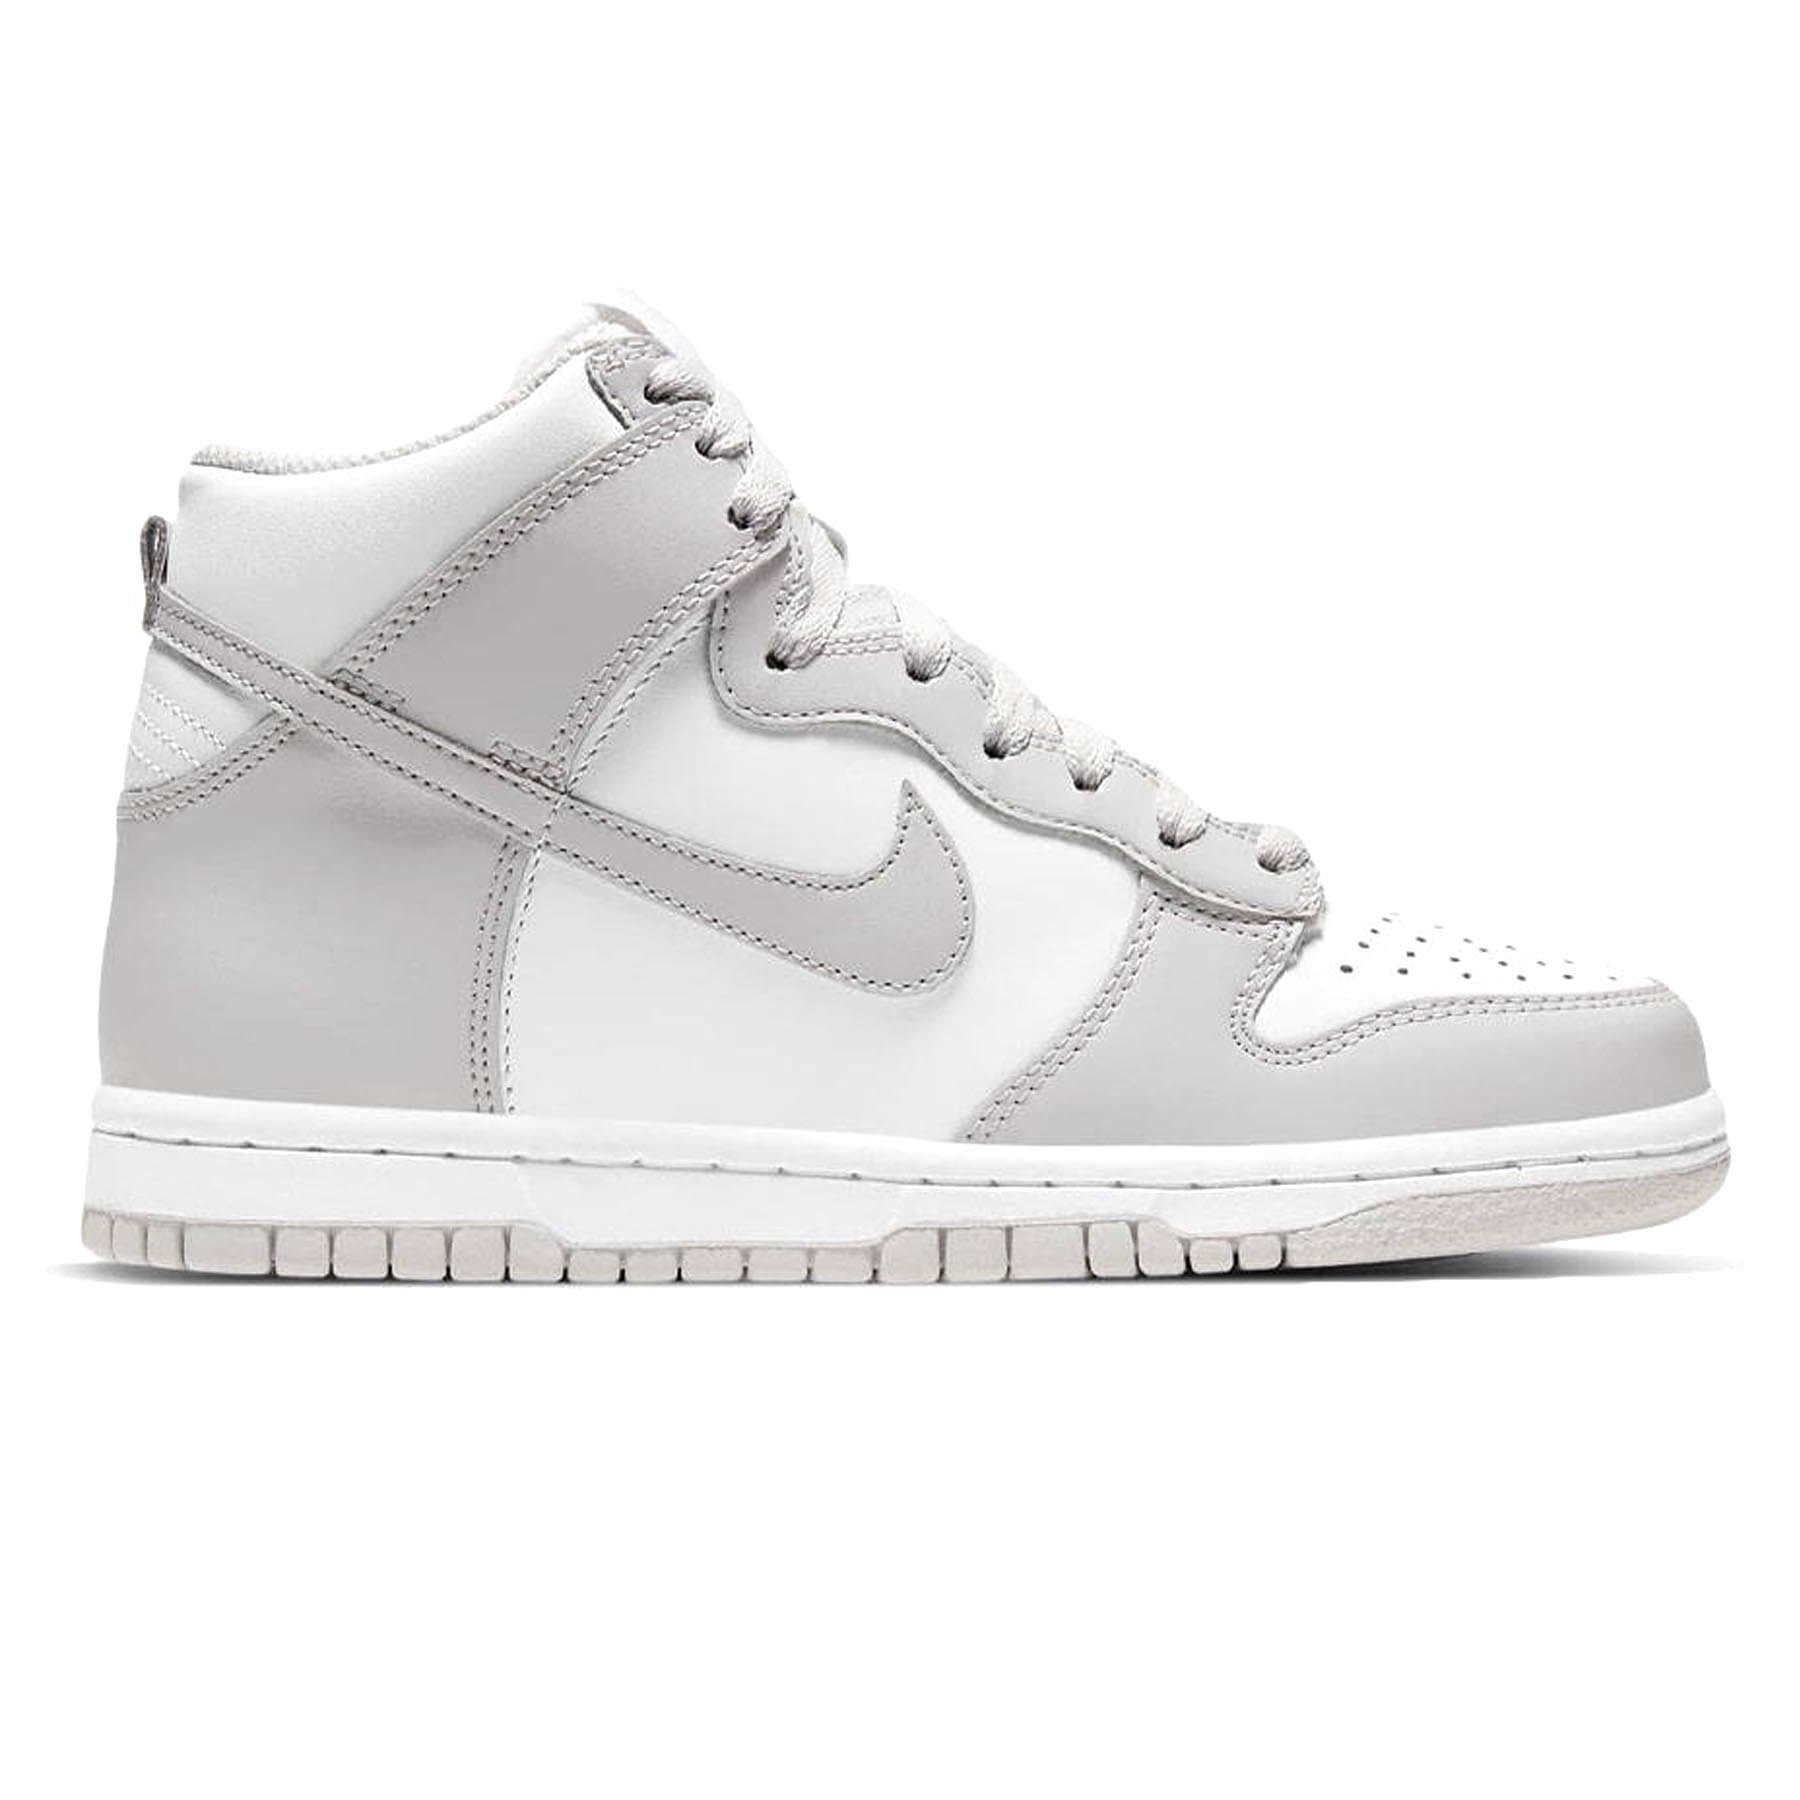 Nike Dunk High 'Vast Grey' 'platinum' GS – What's Your Size UK